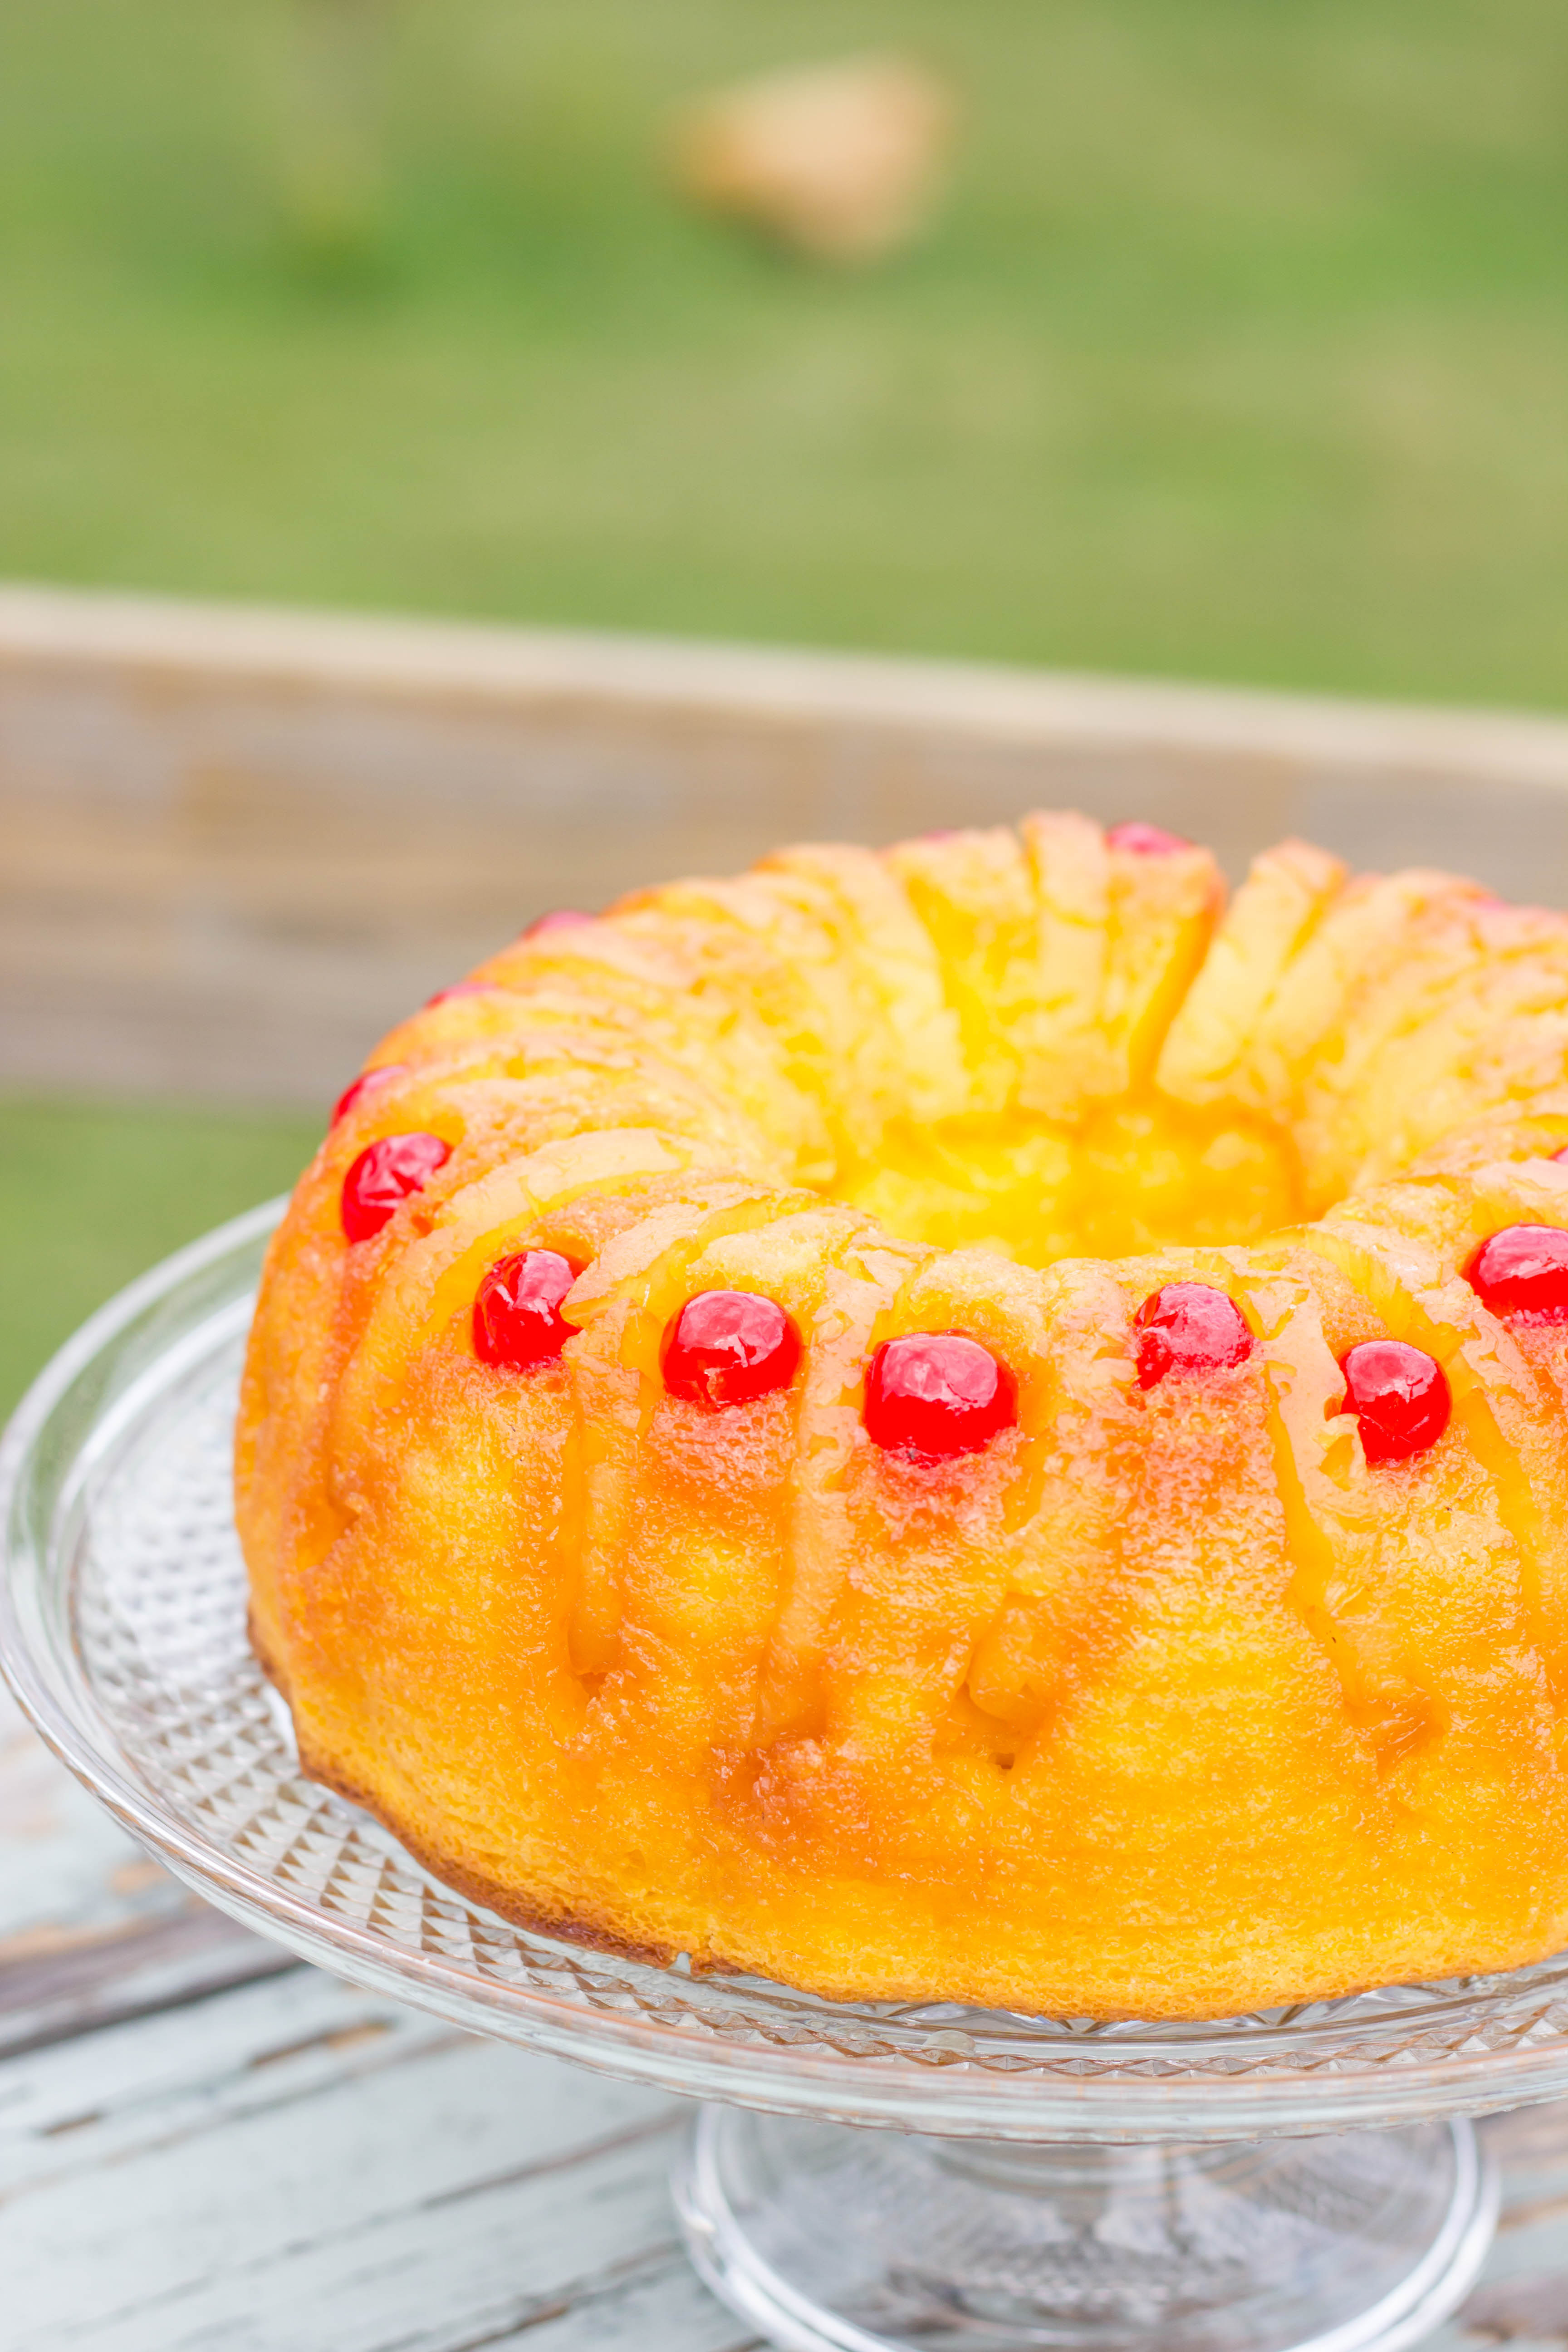 Easy Pineapple Upside Down Cake Recipe With Crushed Pineapple